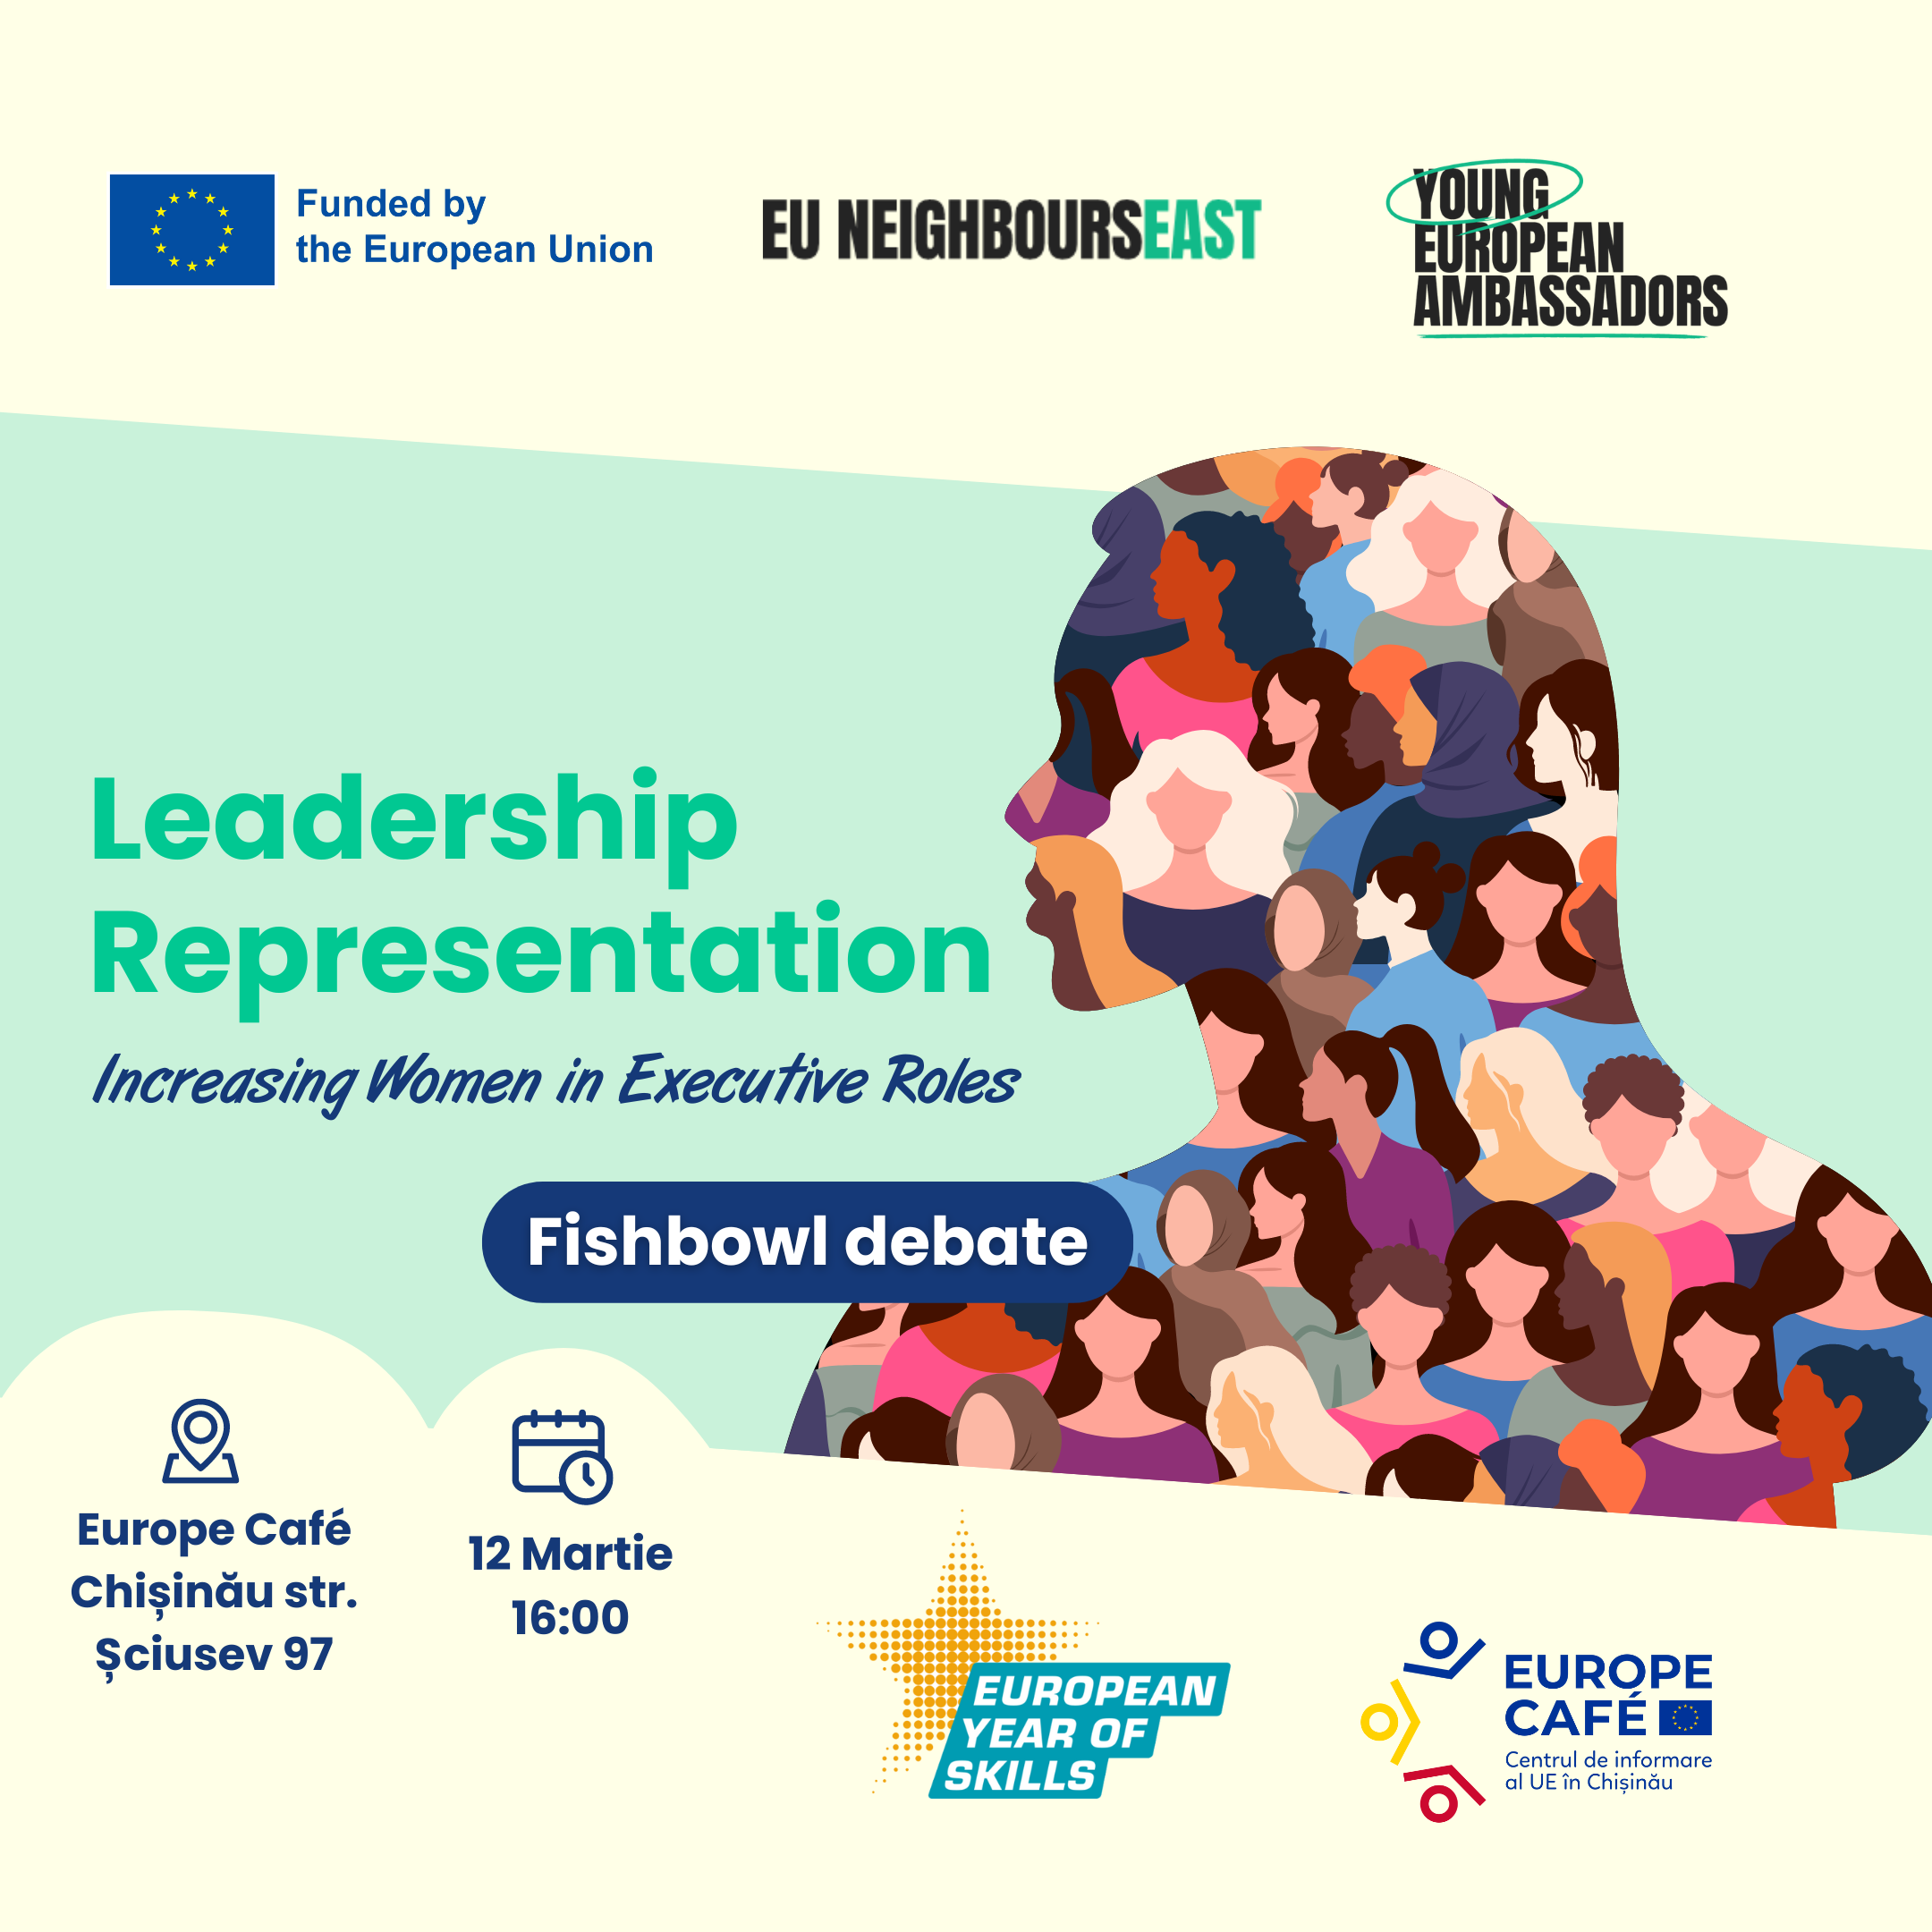 We believe that women's rights are important every day, not just on March 8. Therefore, we invite you to join the discussion initiated by the Young European Ambassadors at Europe Café, on March 12, at 4:00 p.m.